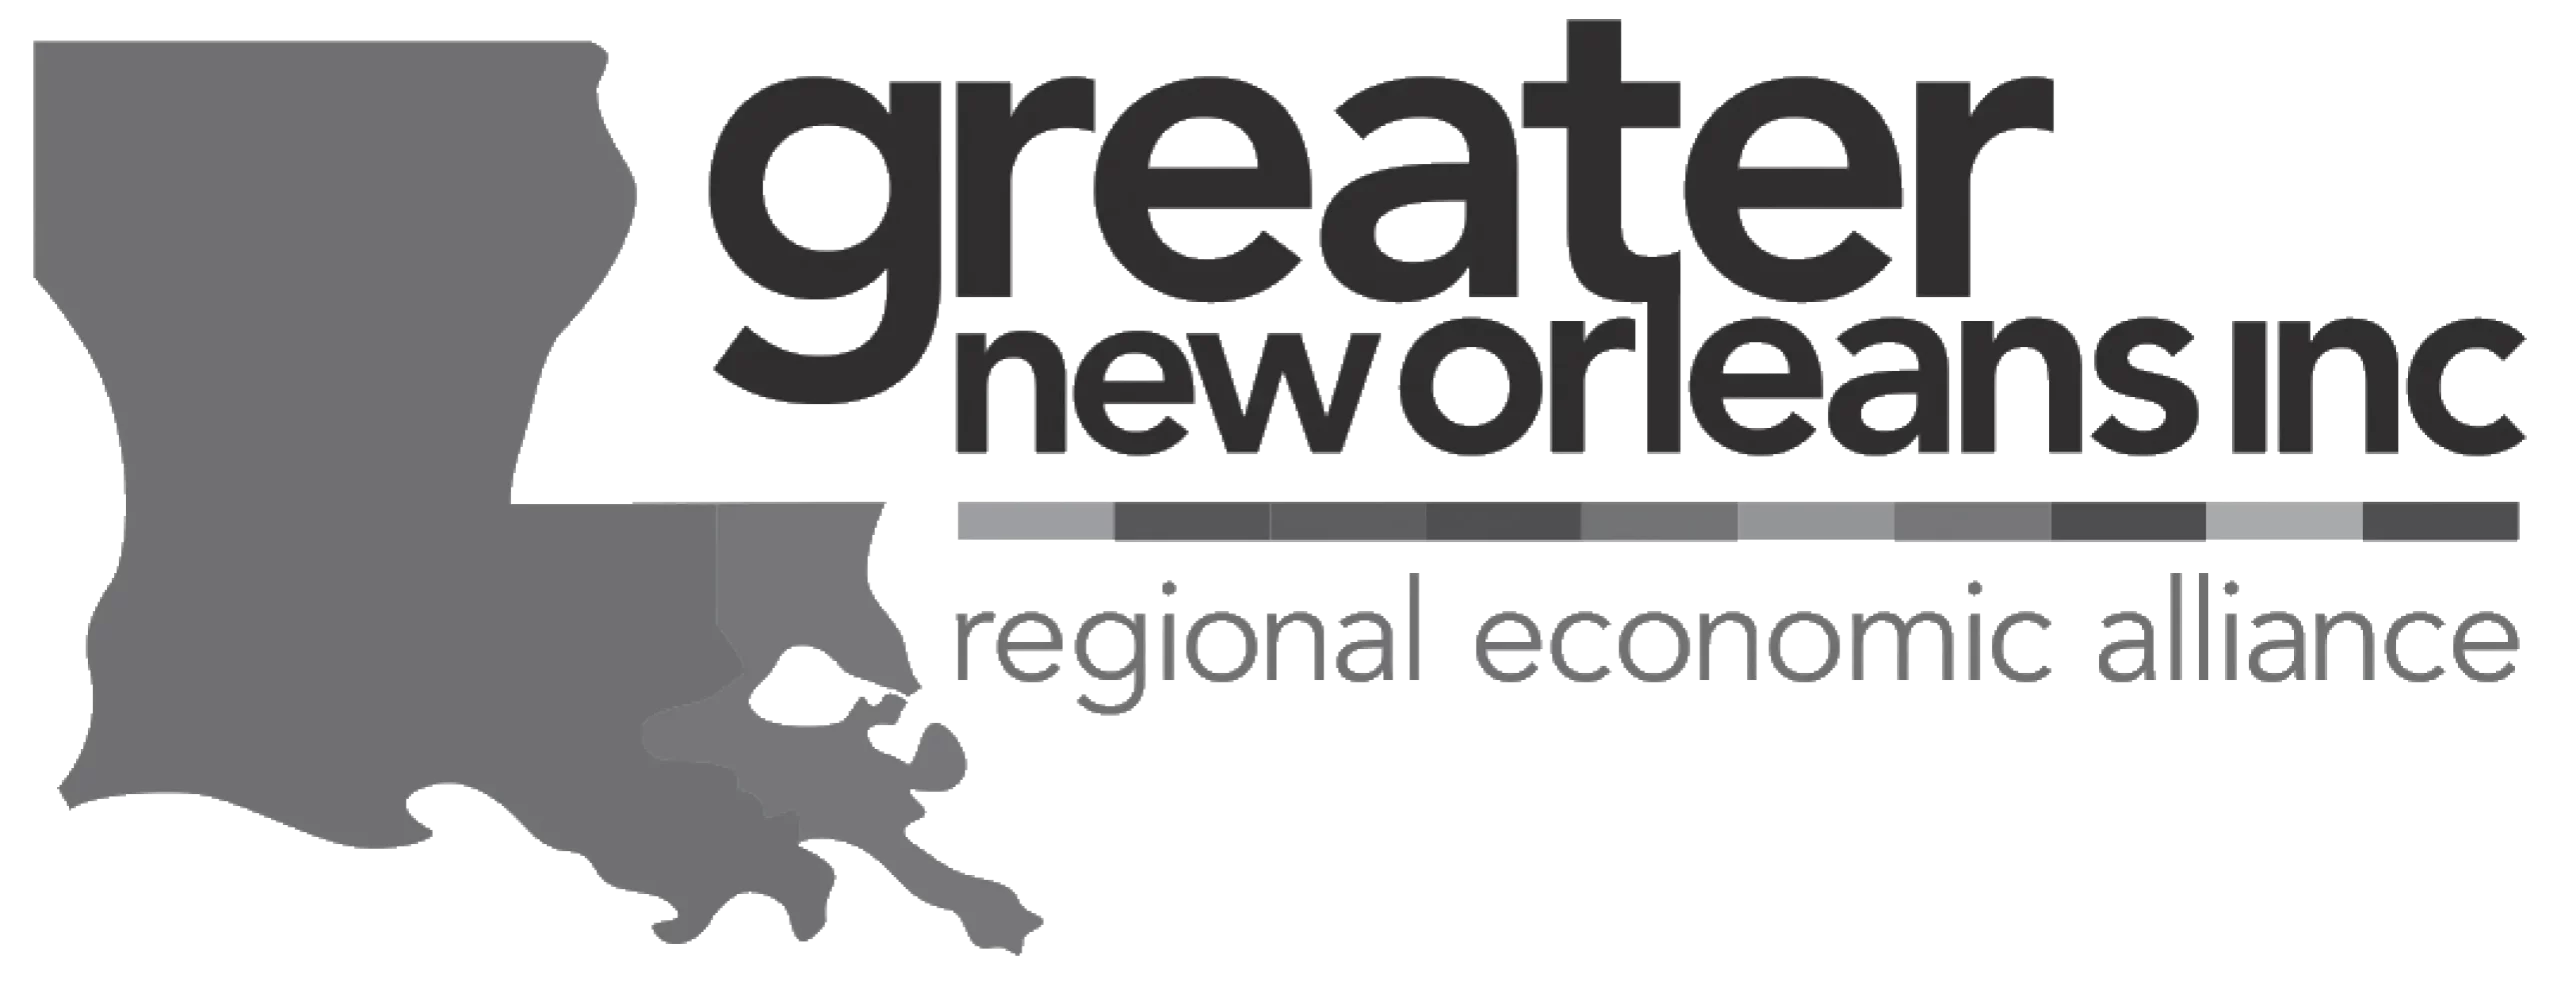 Greater New Orleans Logo